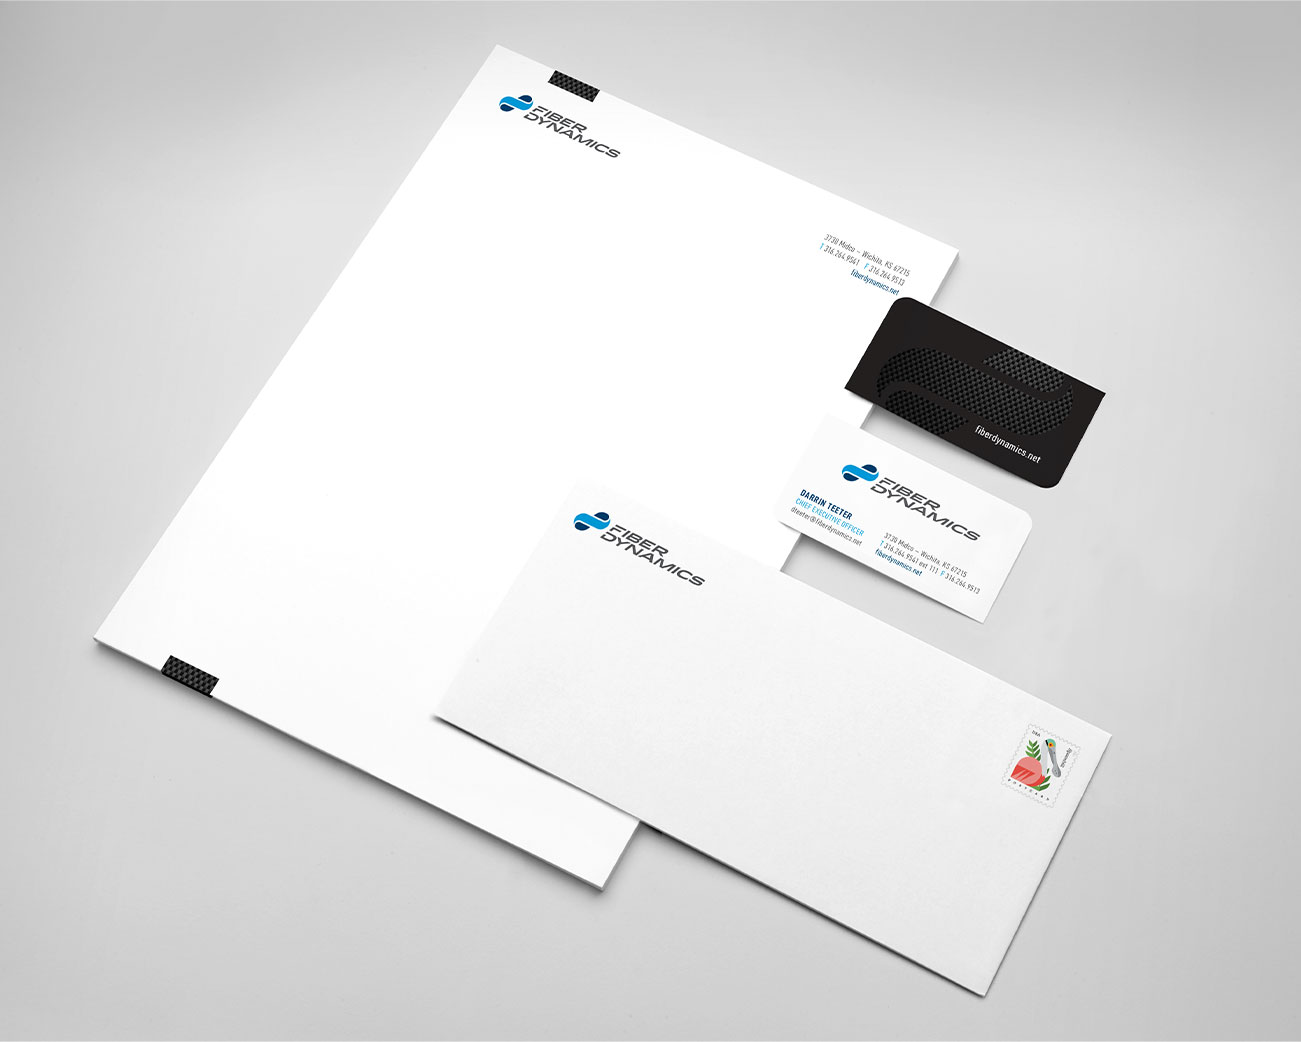 manufacturing brand print assets